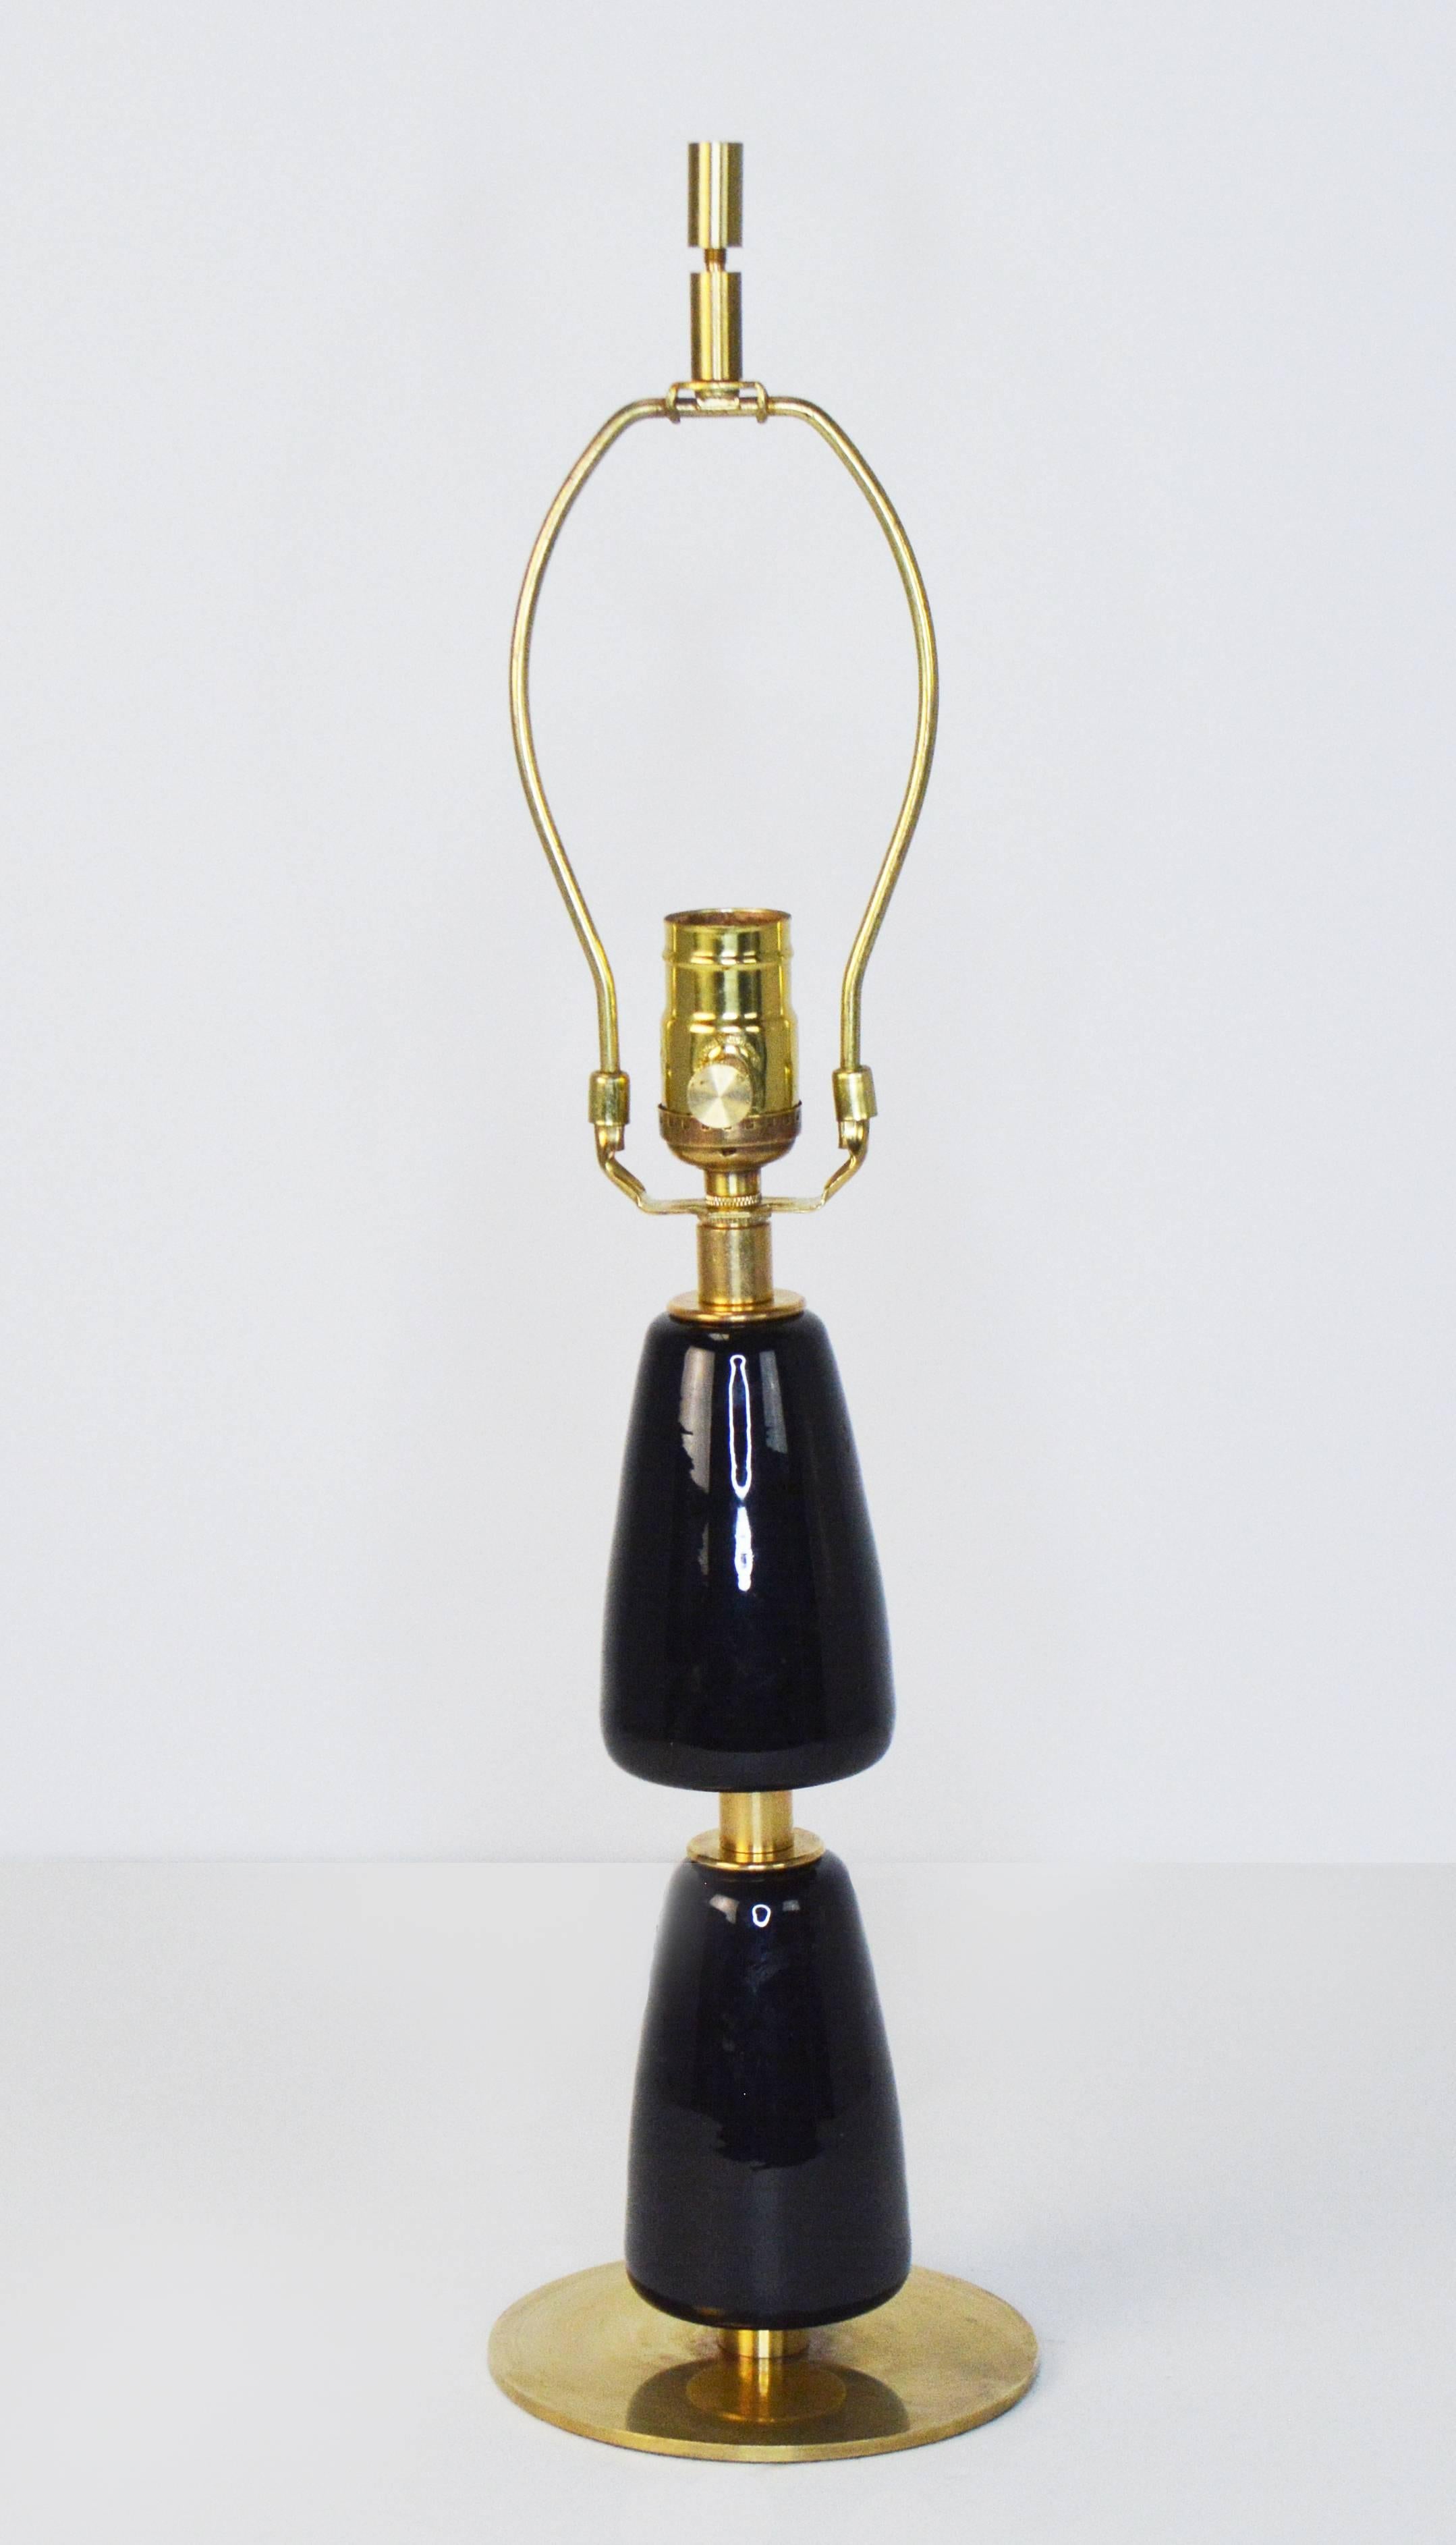 A lovely small-scale lamp in the style of Jacques Adnet, comprising two dark amethyst glass tear shaped drops on a brass base and mounts. Rewired for US use, with new socket and French braid silk cord. Measures is 19 1/2